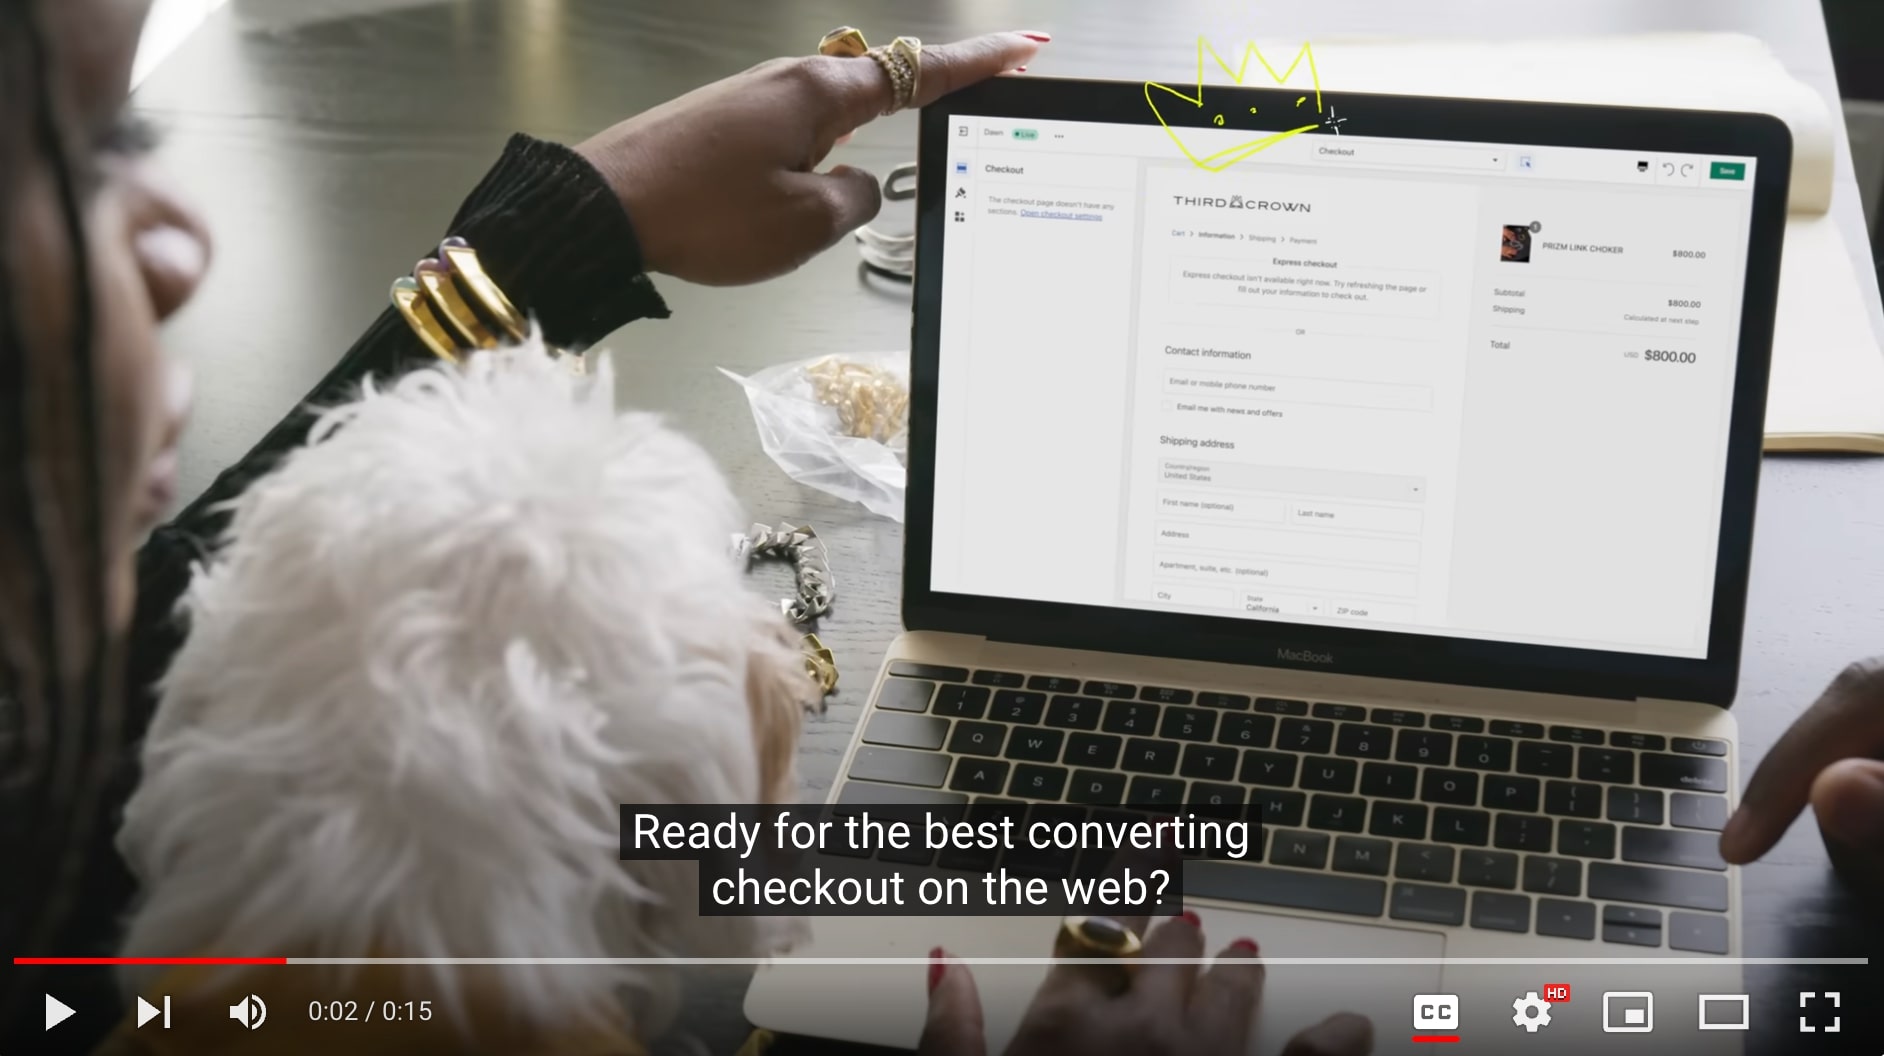 Shopify's video ad begins with “Ready for the best-converting checkout on the web?” message